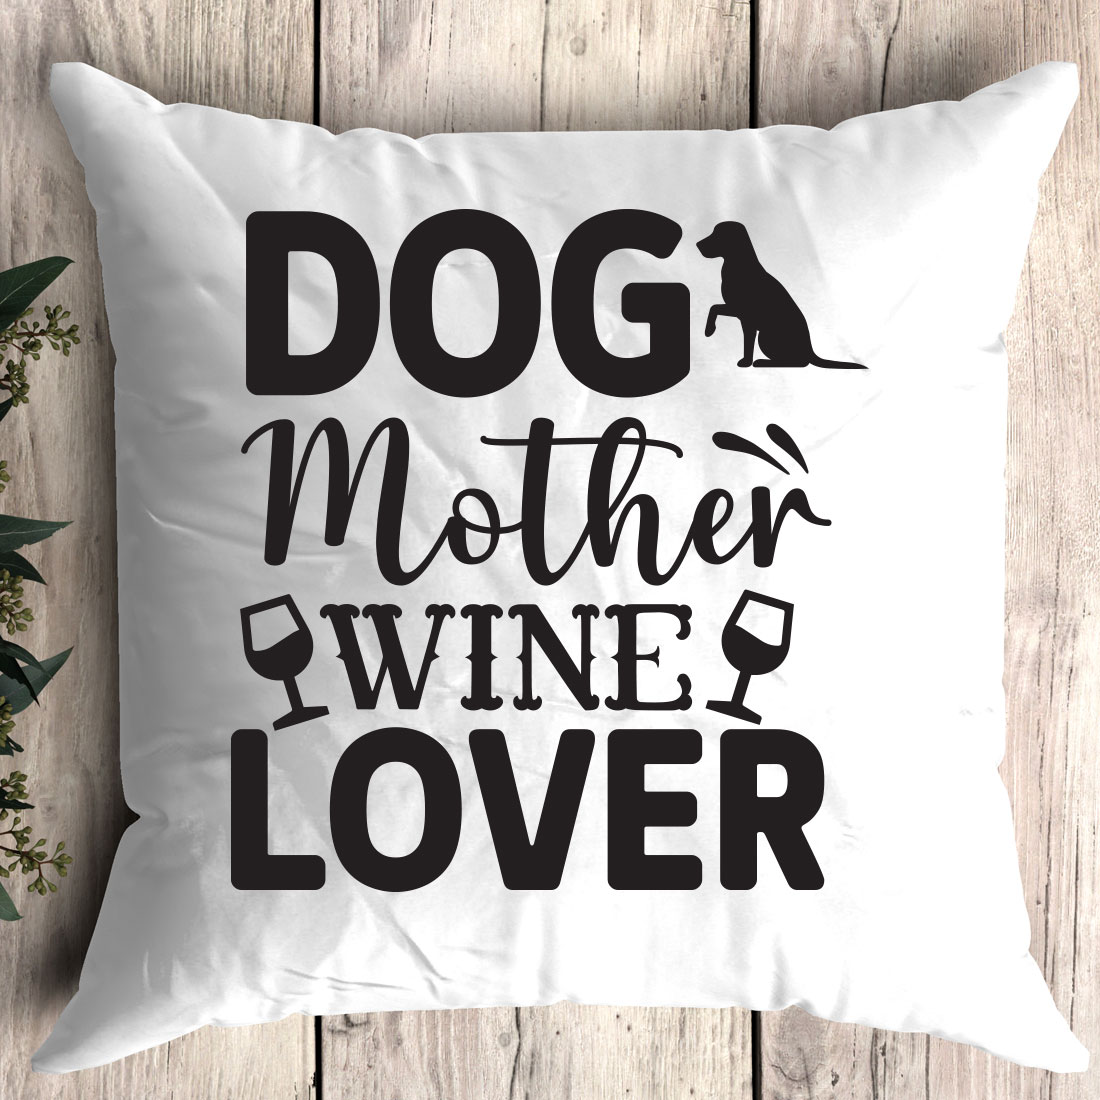 White pillow that says dog mother wine lover.